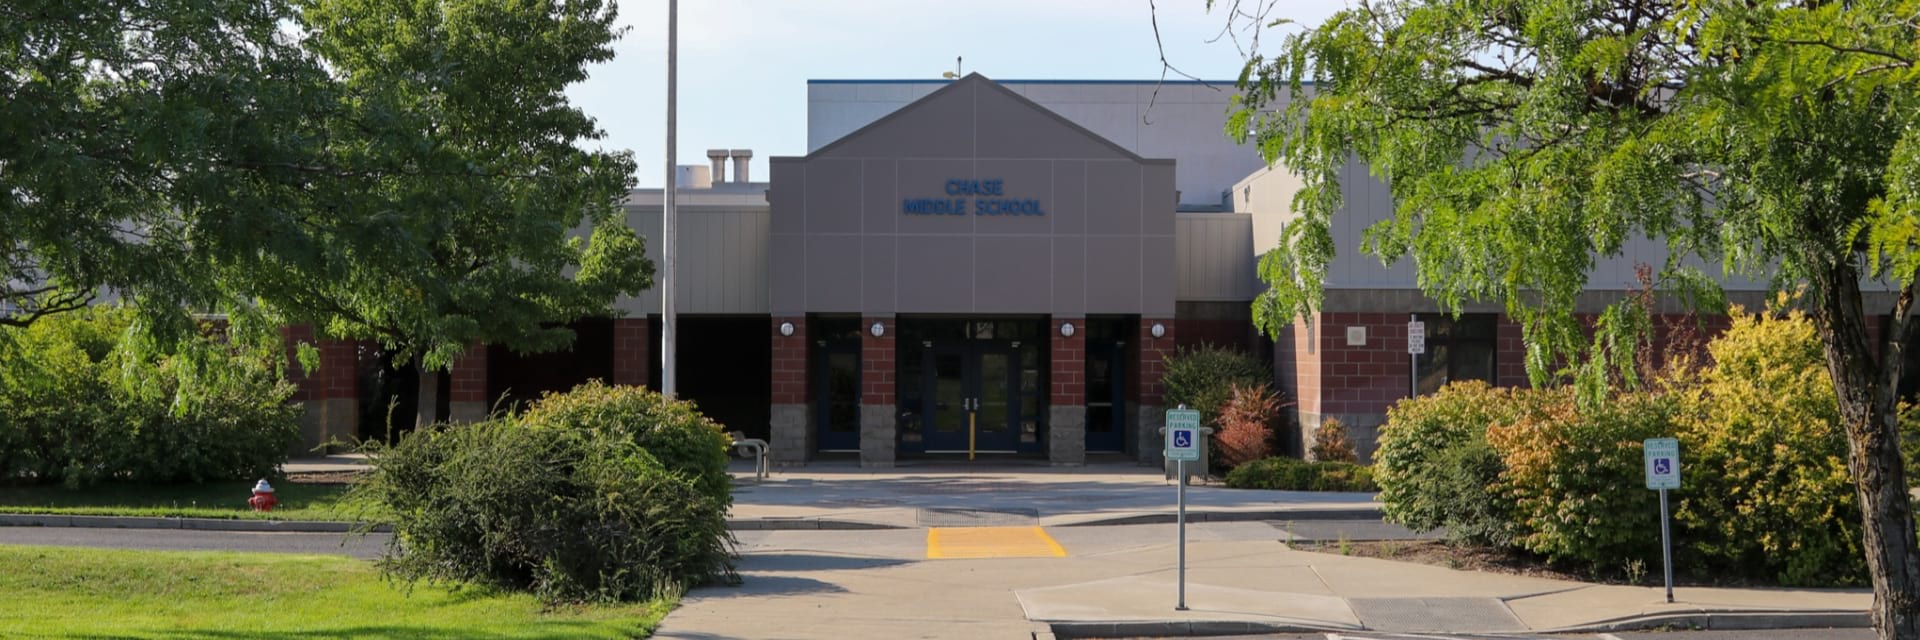 Front entrance to school